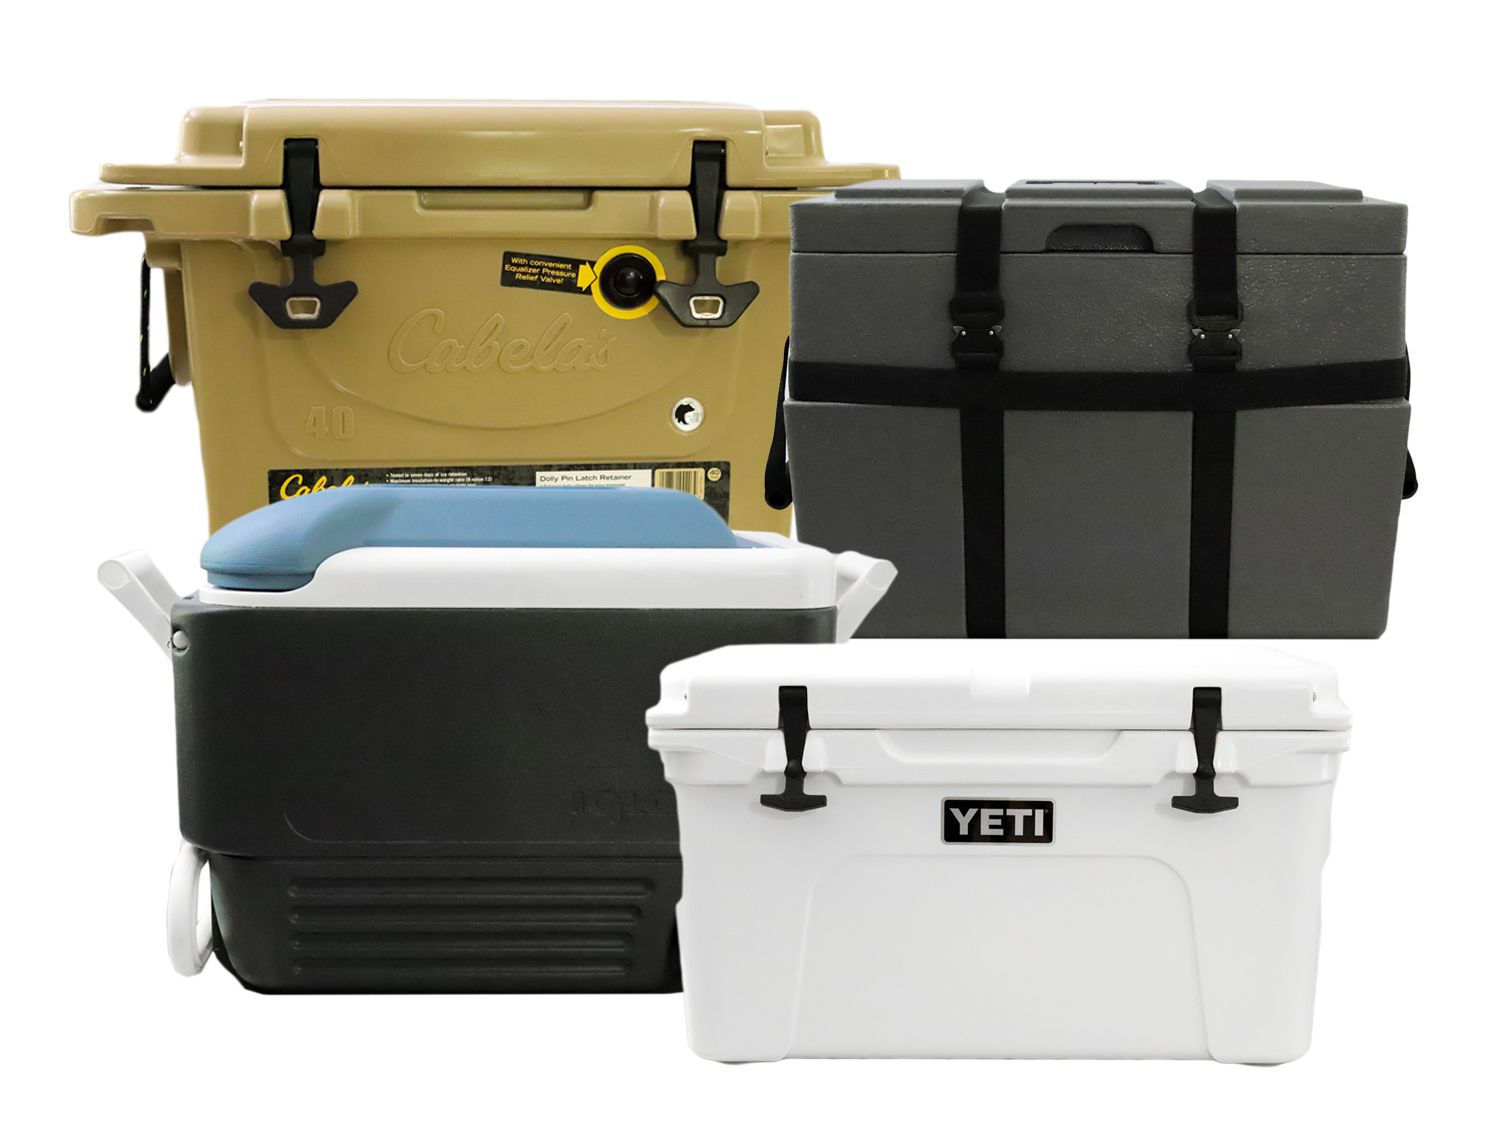 We Tested 8 Coolers